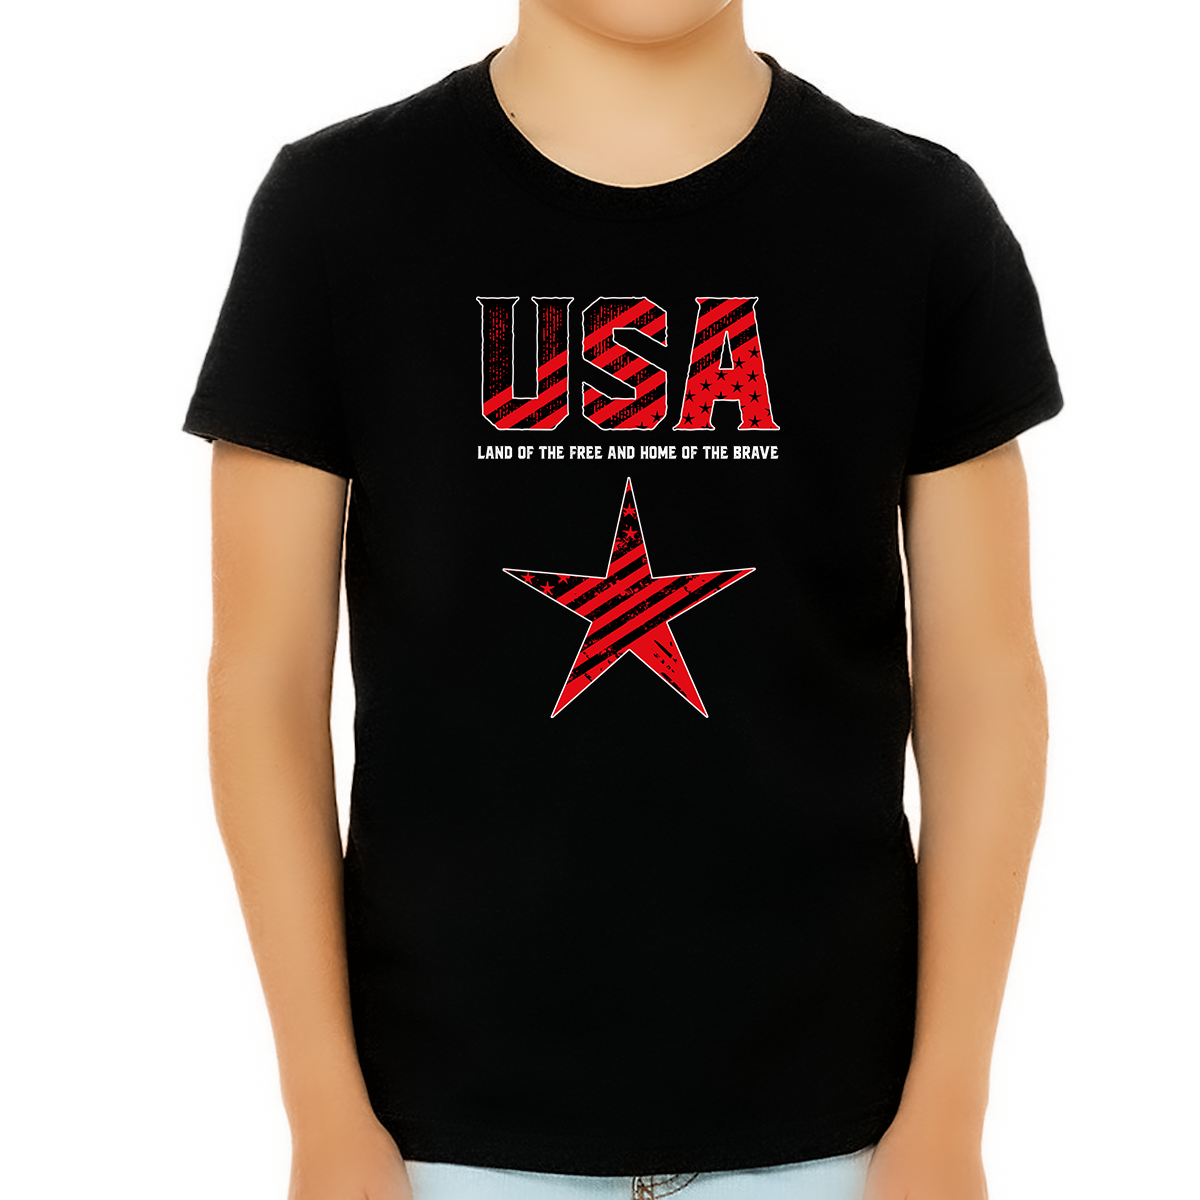 4th of July Shirts for Boys USA Shirt American Star Shirts for Boys American Flag Patriotic Shirts - Fire Fit Designs